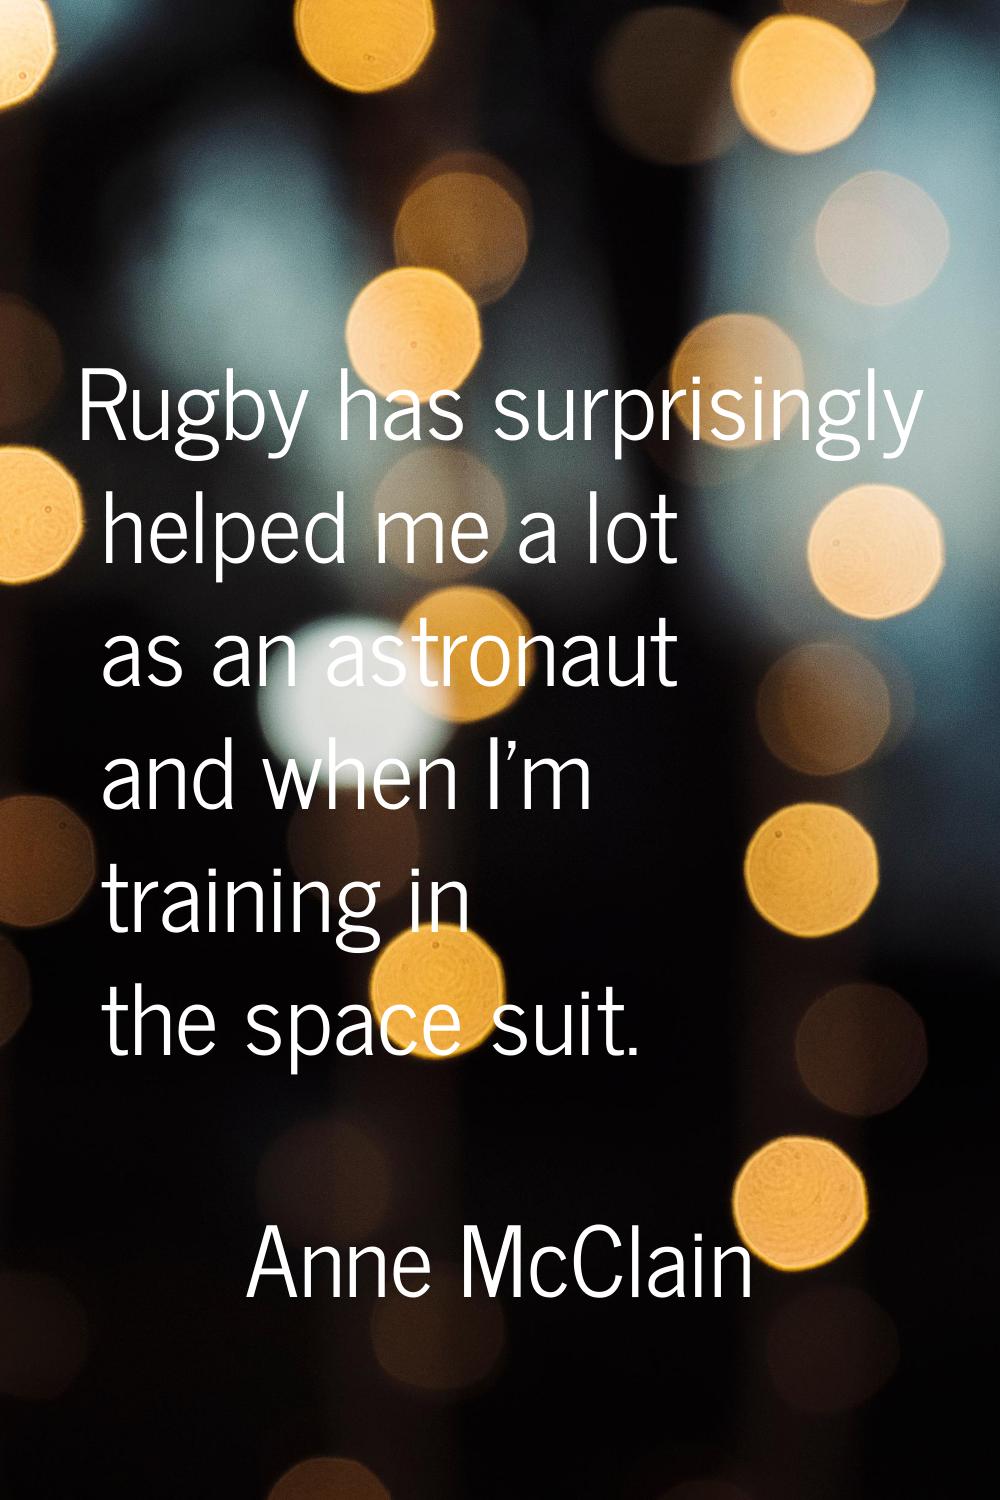 Rugby has surprisingly helped me a lot as an astronaut and when I'm training in the space suit.